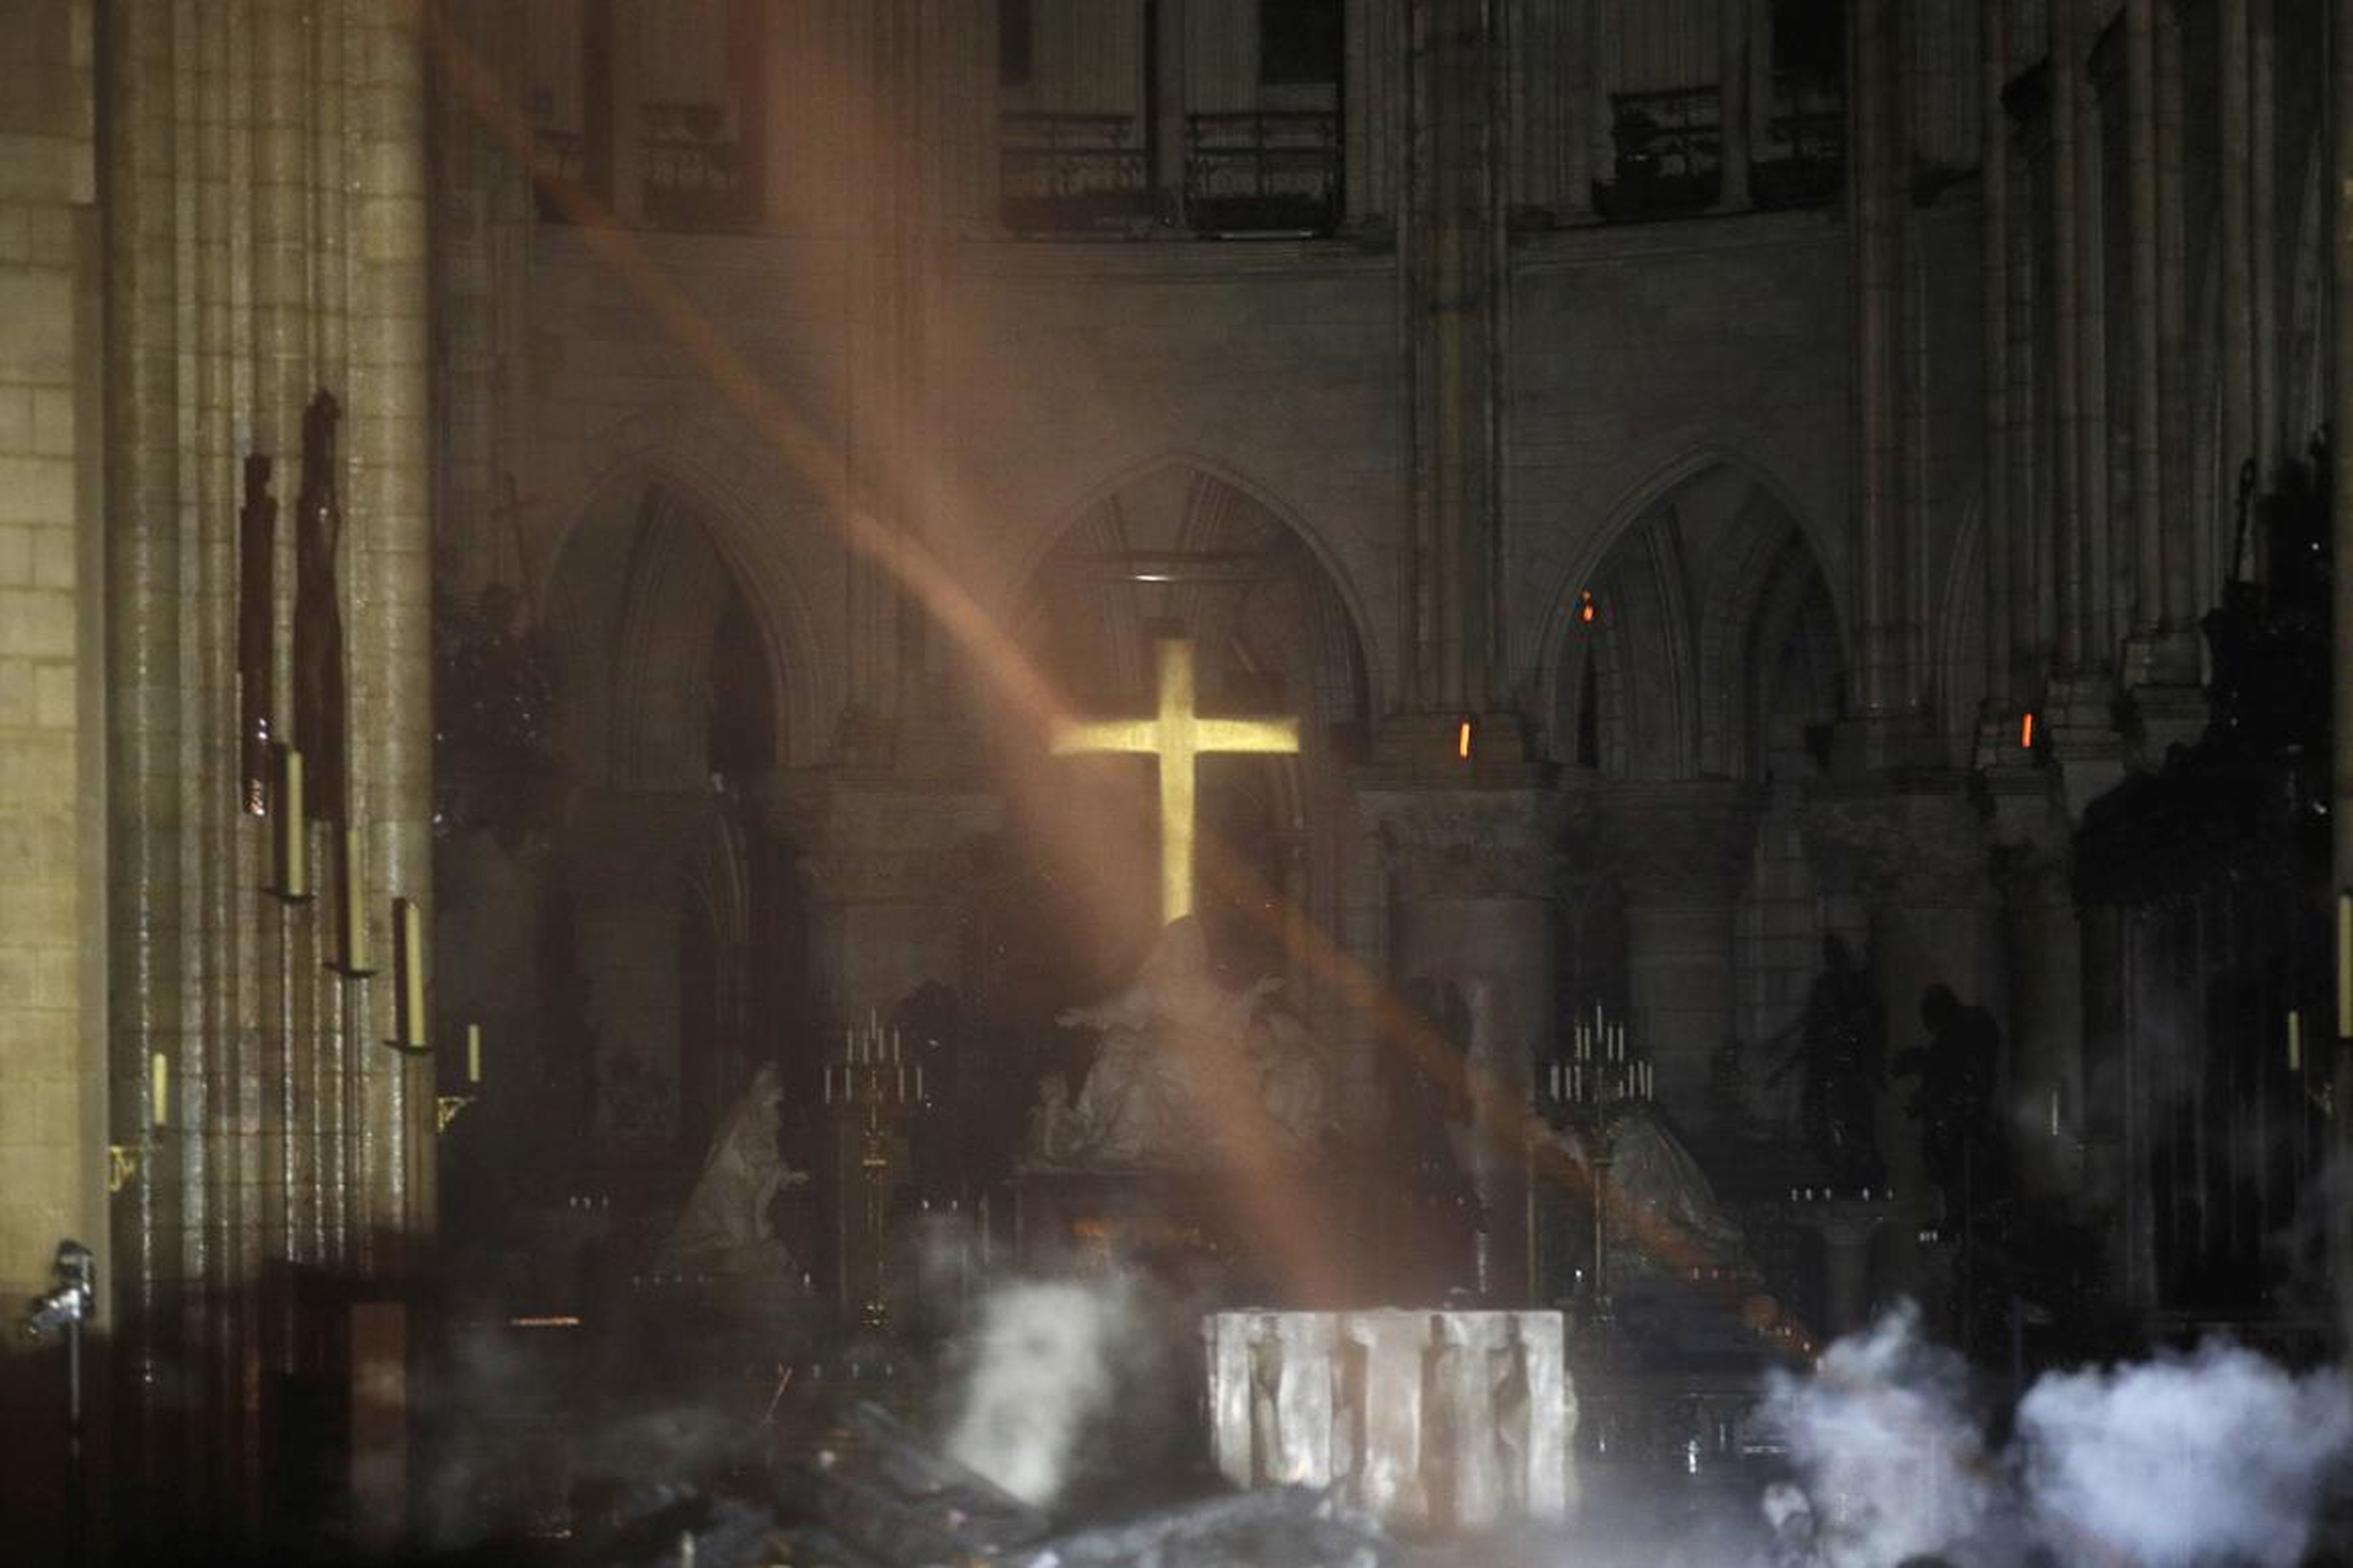 A closer look shows the altar surrounded by smoke.